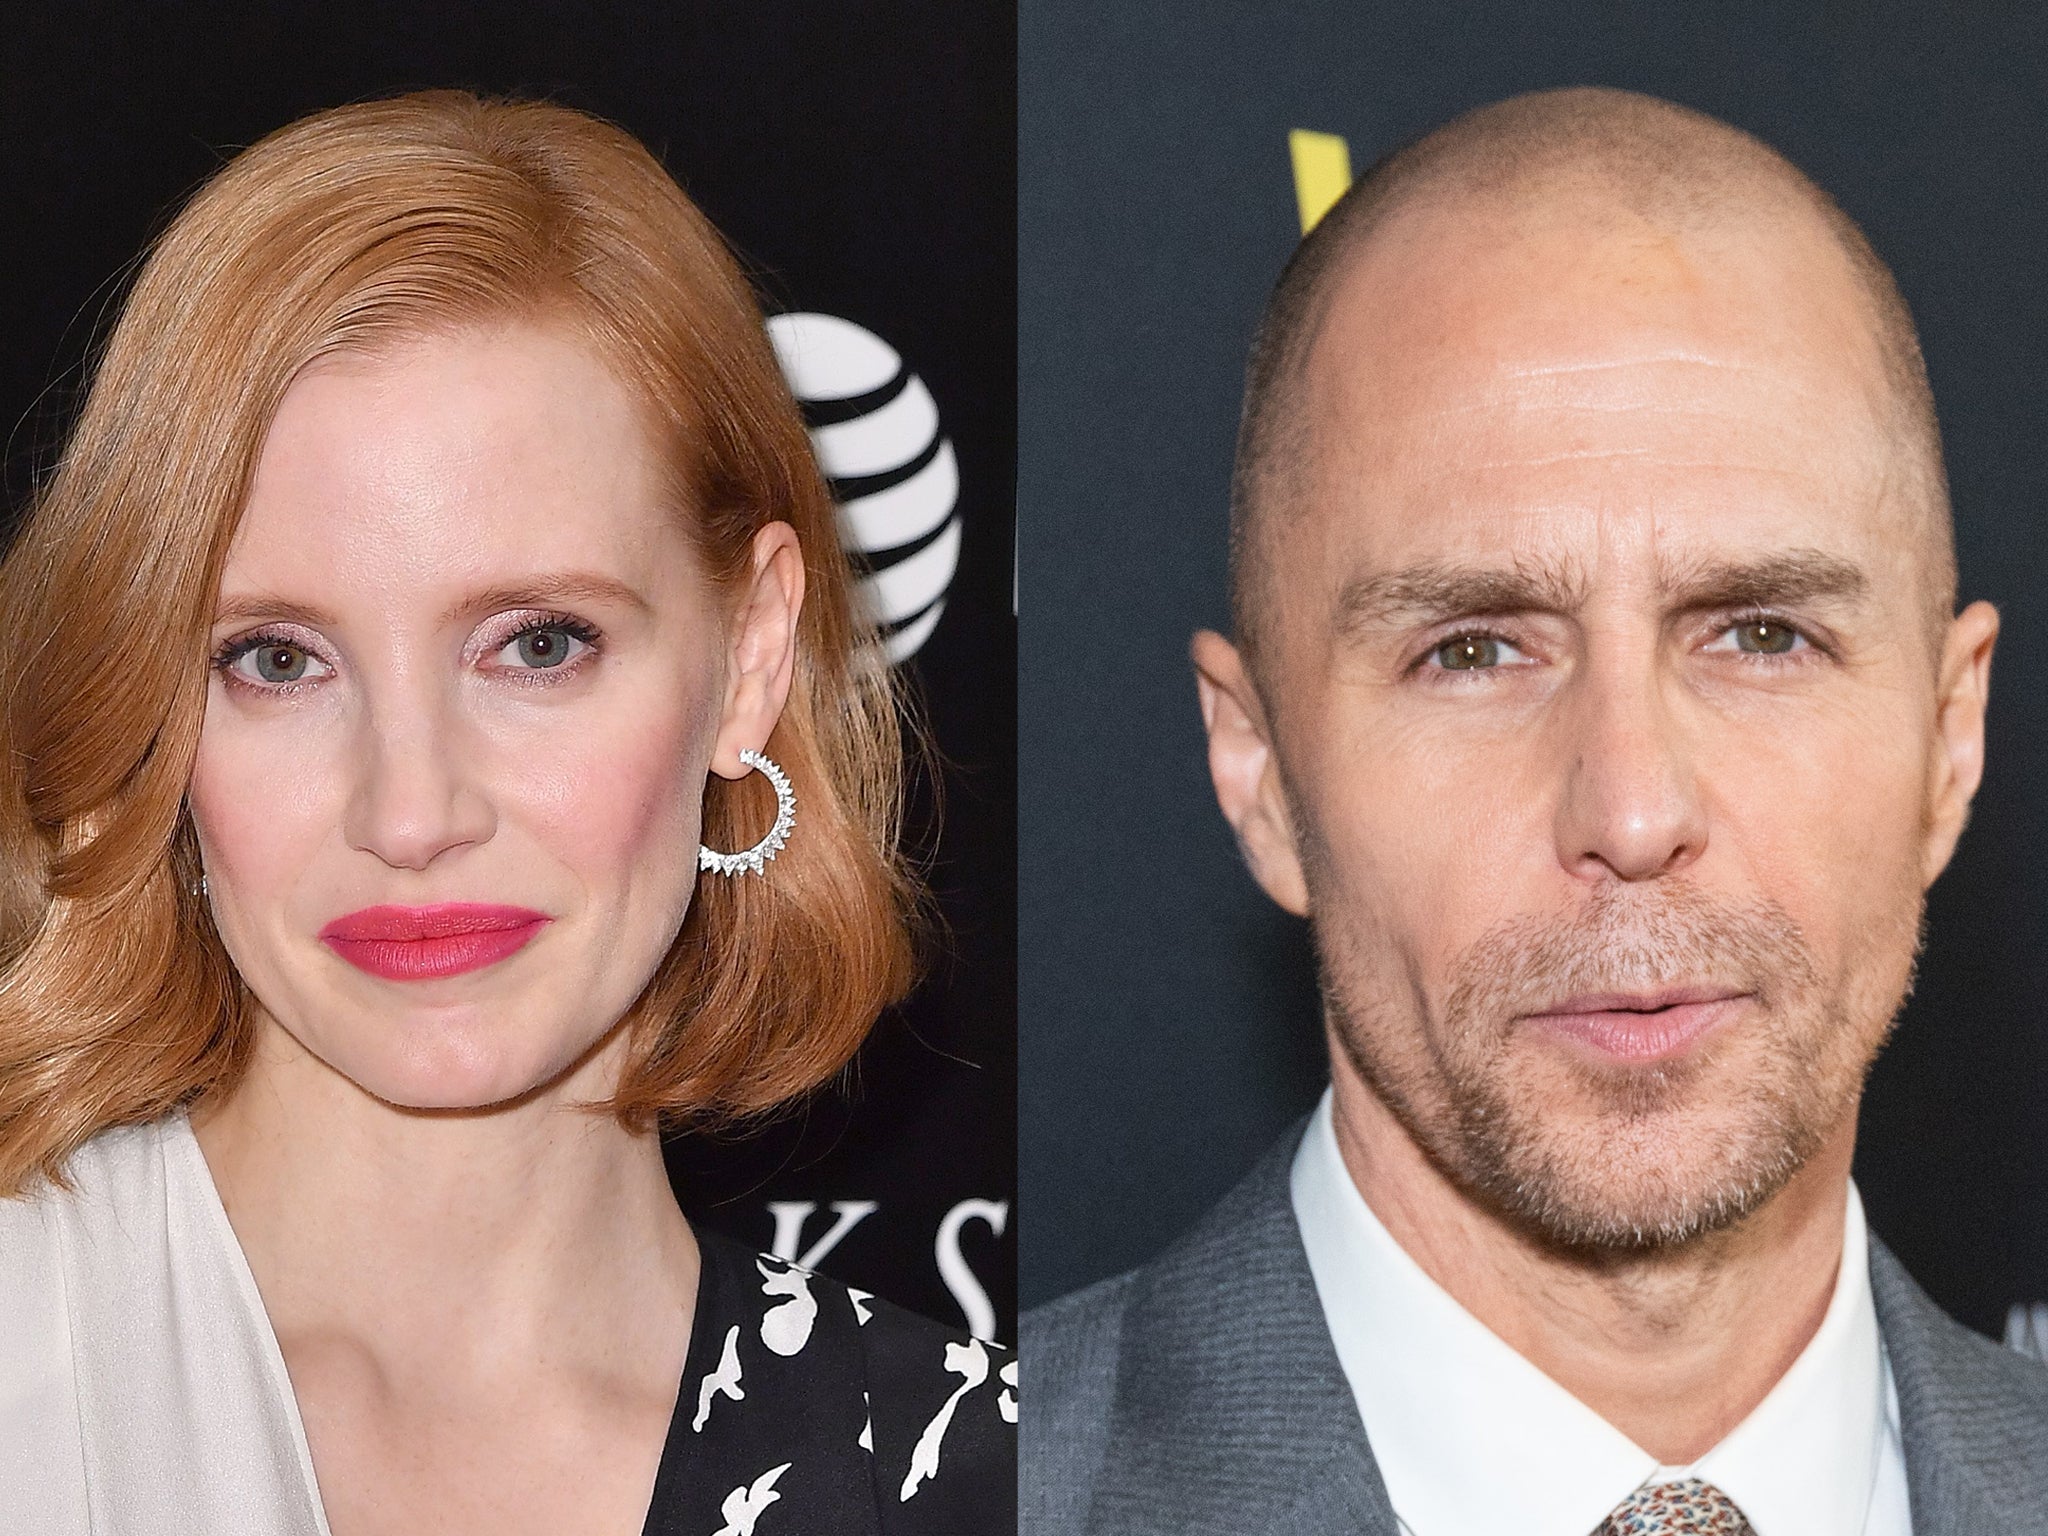 Golden Globes 2019: Jessica Chastain and Sam Rockwell announced as ...